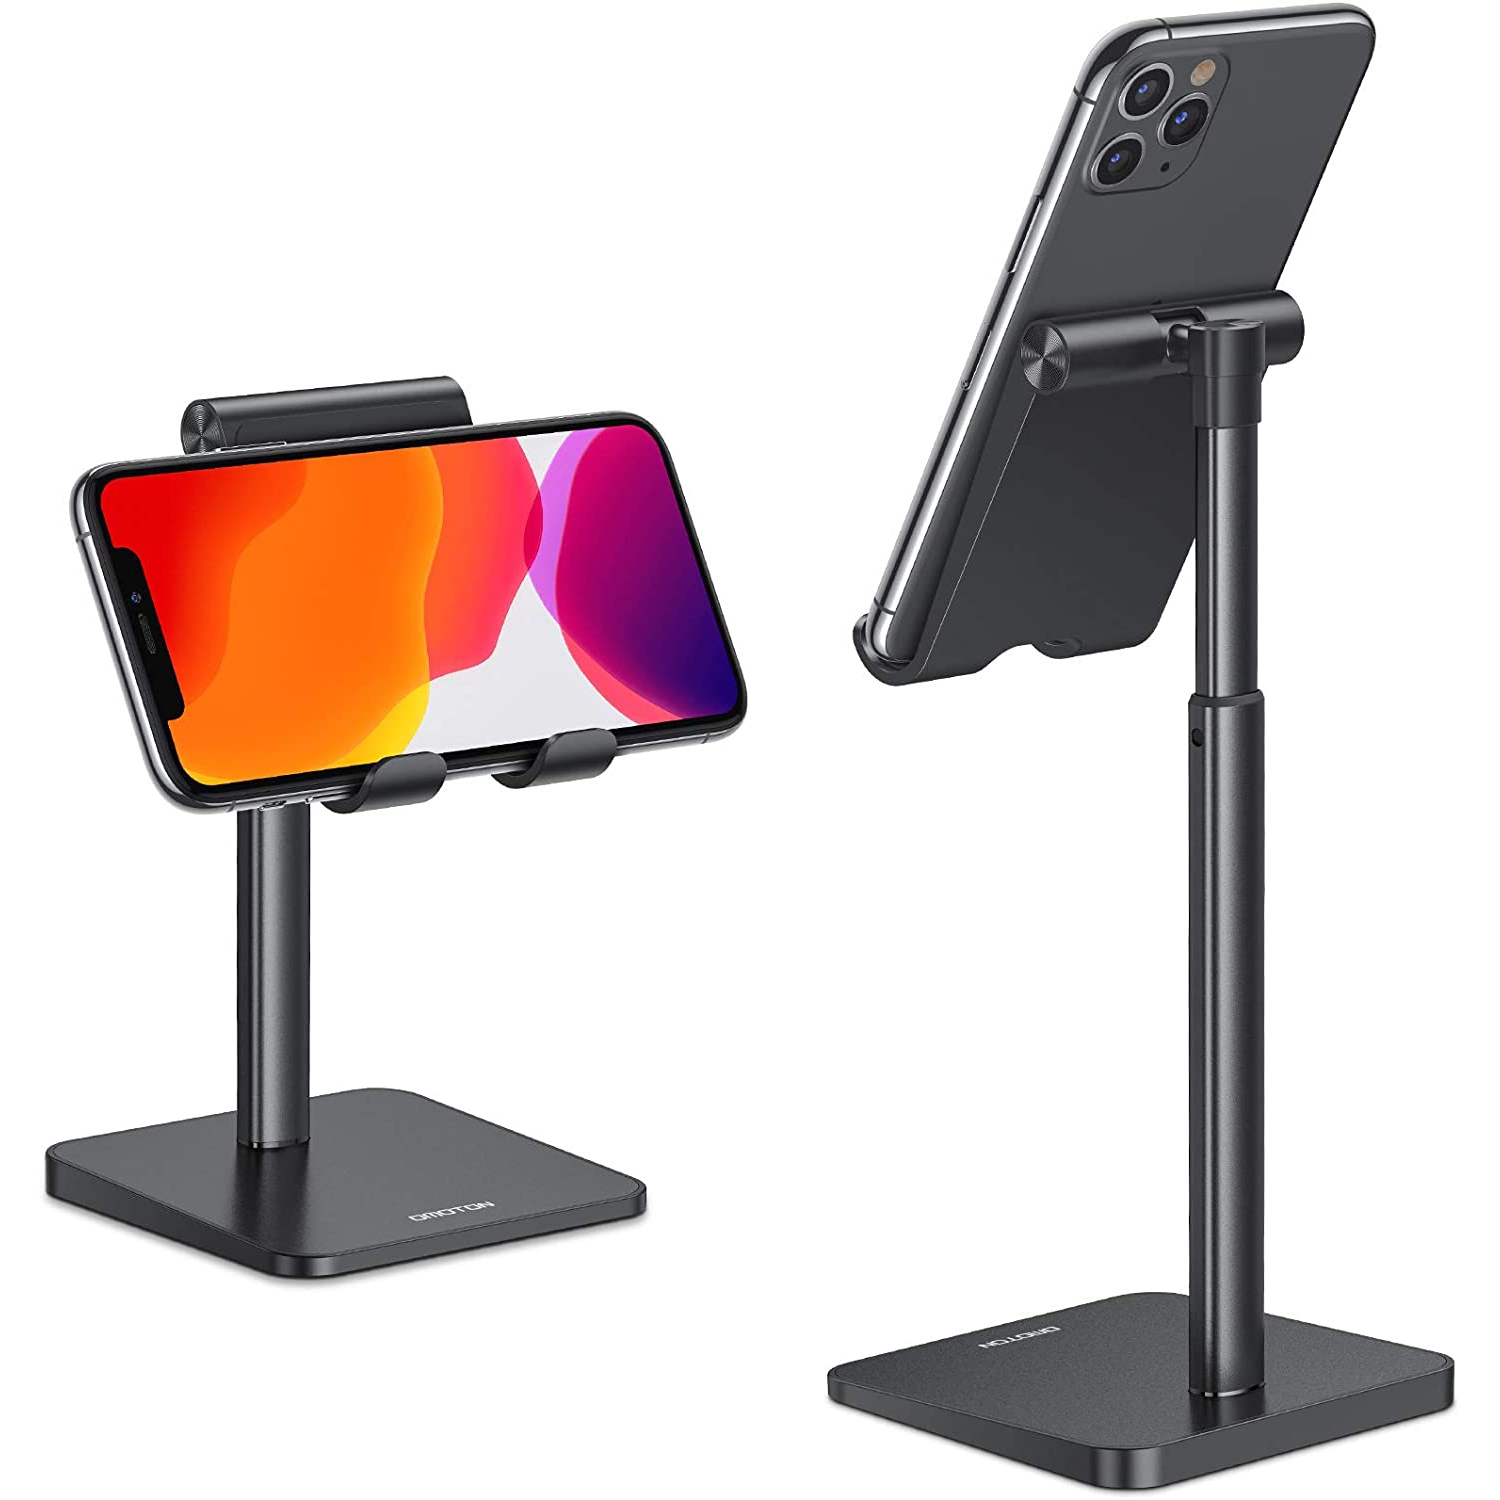 WINGOMART Cell Phone Stand, Adjustable Angle Height Desk Phone Dock Holder for iPhone SE 2/11 / 11 Pro/XS Max/XR, Samsung Galaxy Note 20 / S20 / S10 / S9 and Other Phones (3.5-7.0-Inch), Black